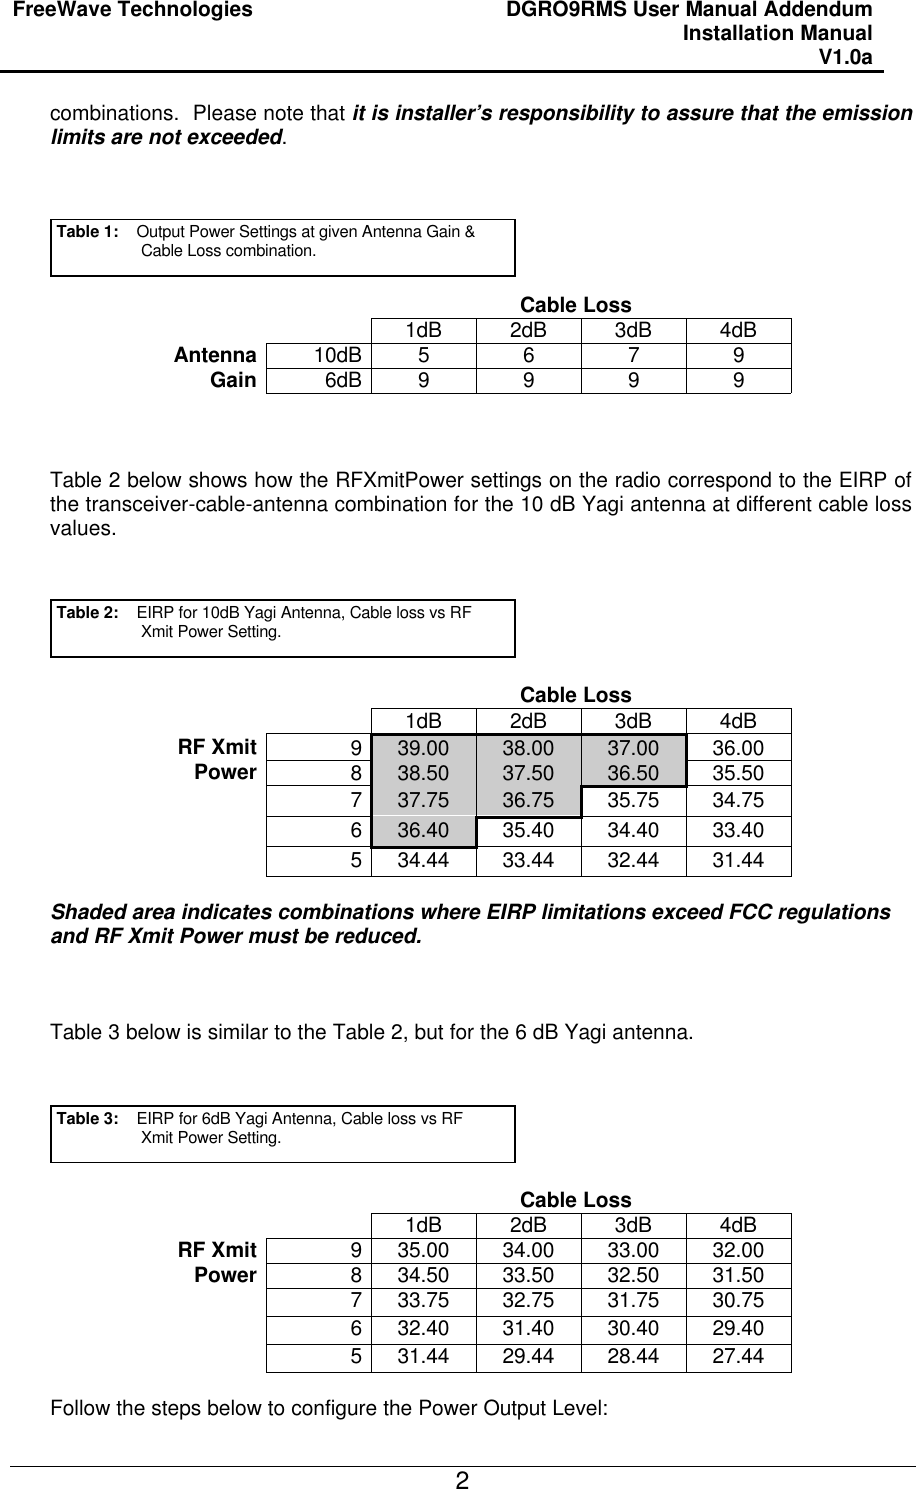 FreeWave Technologies DGRO9RMS User Manual Addendum Installation Manual V1.0a   2combinations.  Please note that it is installer’s responsibility to assure that the emission limits are not exceeded.           Table 2 below shows how the RFXmitPower settings on the radio correspond to the EIRP of the transceiver-cable-antenna combination for the 10 dB Yagi antenna at different cable loss values.        Shaded area indicates combinations where EIRP limitations exceed FCC regulations and RF Xmit Power must be reduced.    Table 3 below is similar to the Table 2, but for the 6 dB Yagi antenna.        Follow the steps below to configure the Power Output Level: Table 1:    Output Power Settings at given Antenna Gain &amp; Cable Loss combination. Cable Loss     1dB 2dB 3dB 4dB Antenna 10dB 5 6 7 9 Gain 6dB 9 9 9 9       Table 2:    EIRP for 10dB Yagi Antenna, Cable loss vs RF Xmit Power Setting. Cable Loss     1dB 2dB 3dB 4dB RF Xmit 9 39.00 38.00 37.00 36.00 Power 8 38.50 37.50 36.50 35.50  7 37.75 36.75 35.75 34.75  6 36.40 35.40 34.40 33.40  5 34.44 33.44 32.44 31.44 Table 3:    EIRP for 6dB Yagi Antenna, Cable loss vs RF Xmit Power Setting. Cable Loss     1dB 2dB 3dB 4dB RF Xmit 9 35.00 34.00 33.00 32.00 Power 8 34.50 33.50 32.50 31.50  7 33.75 32.75 31.75 30.75  6 32.40 31.40 30.40 29.40  5 31.44 29.44 28.44 27.44 